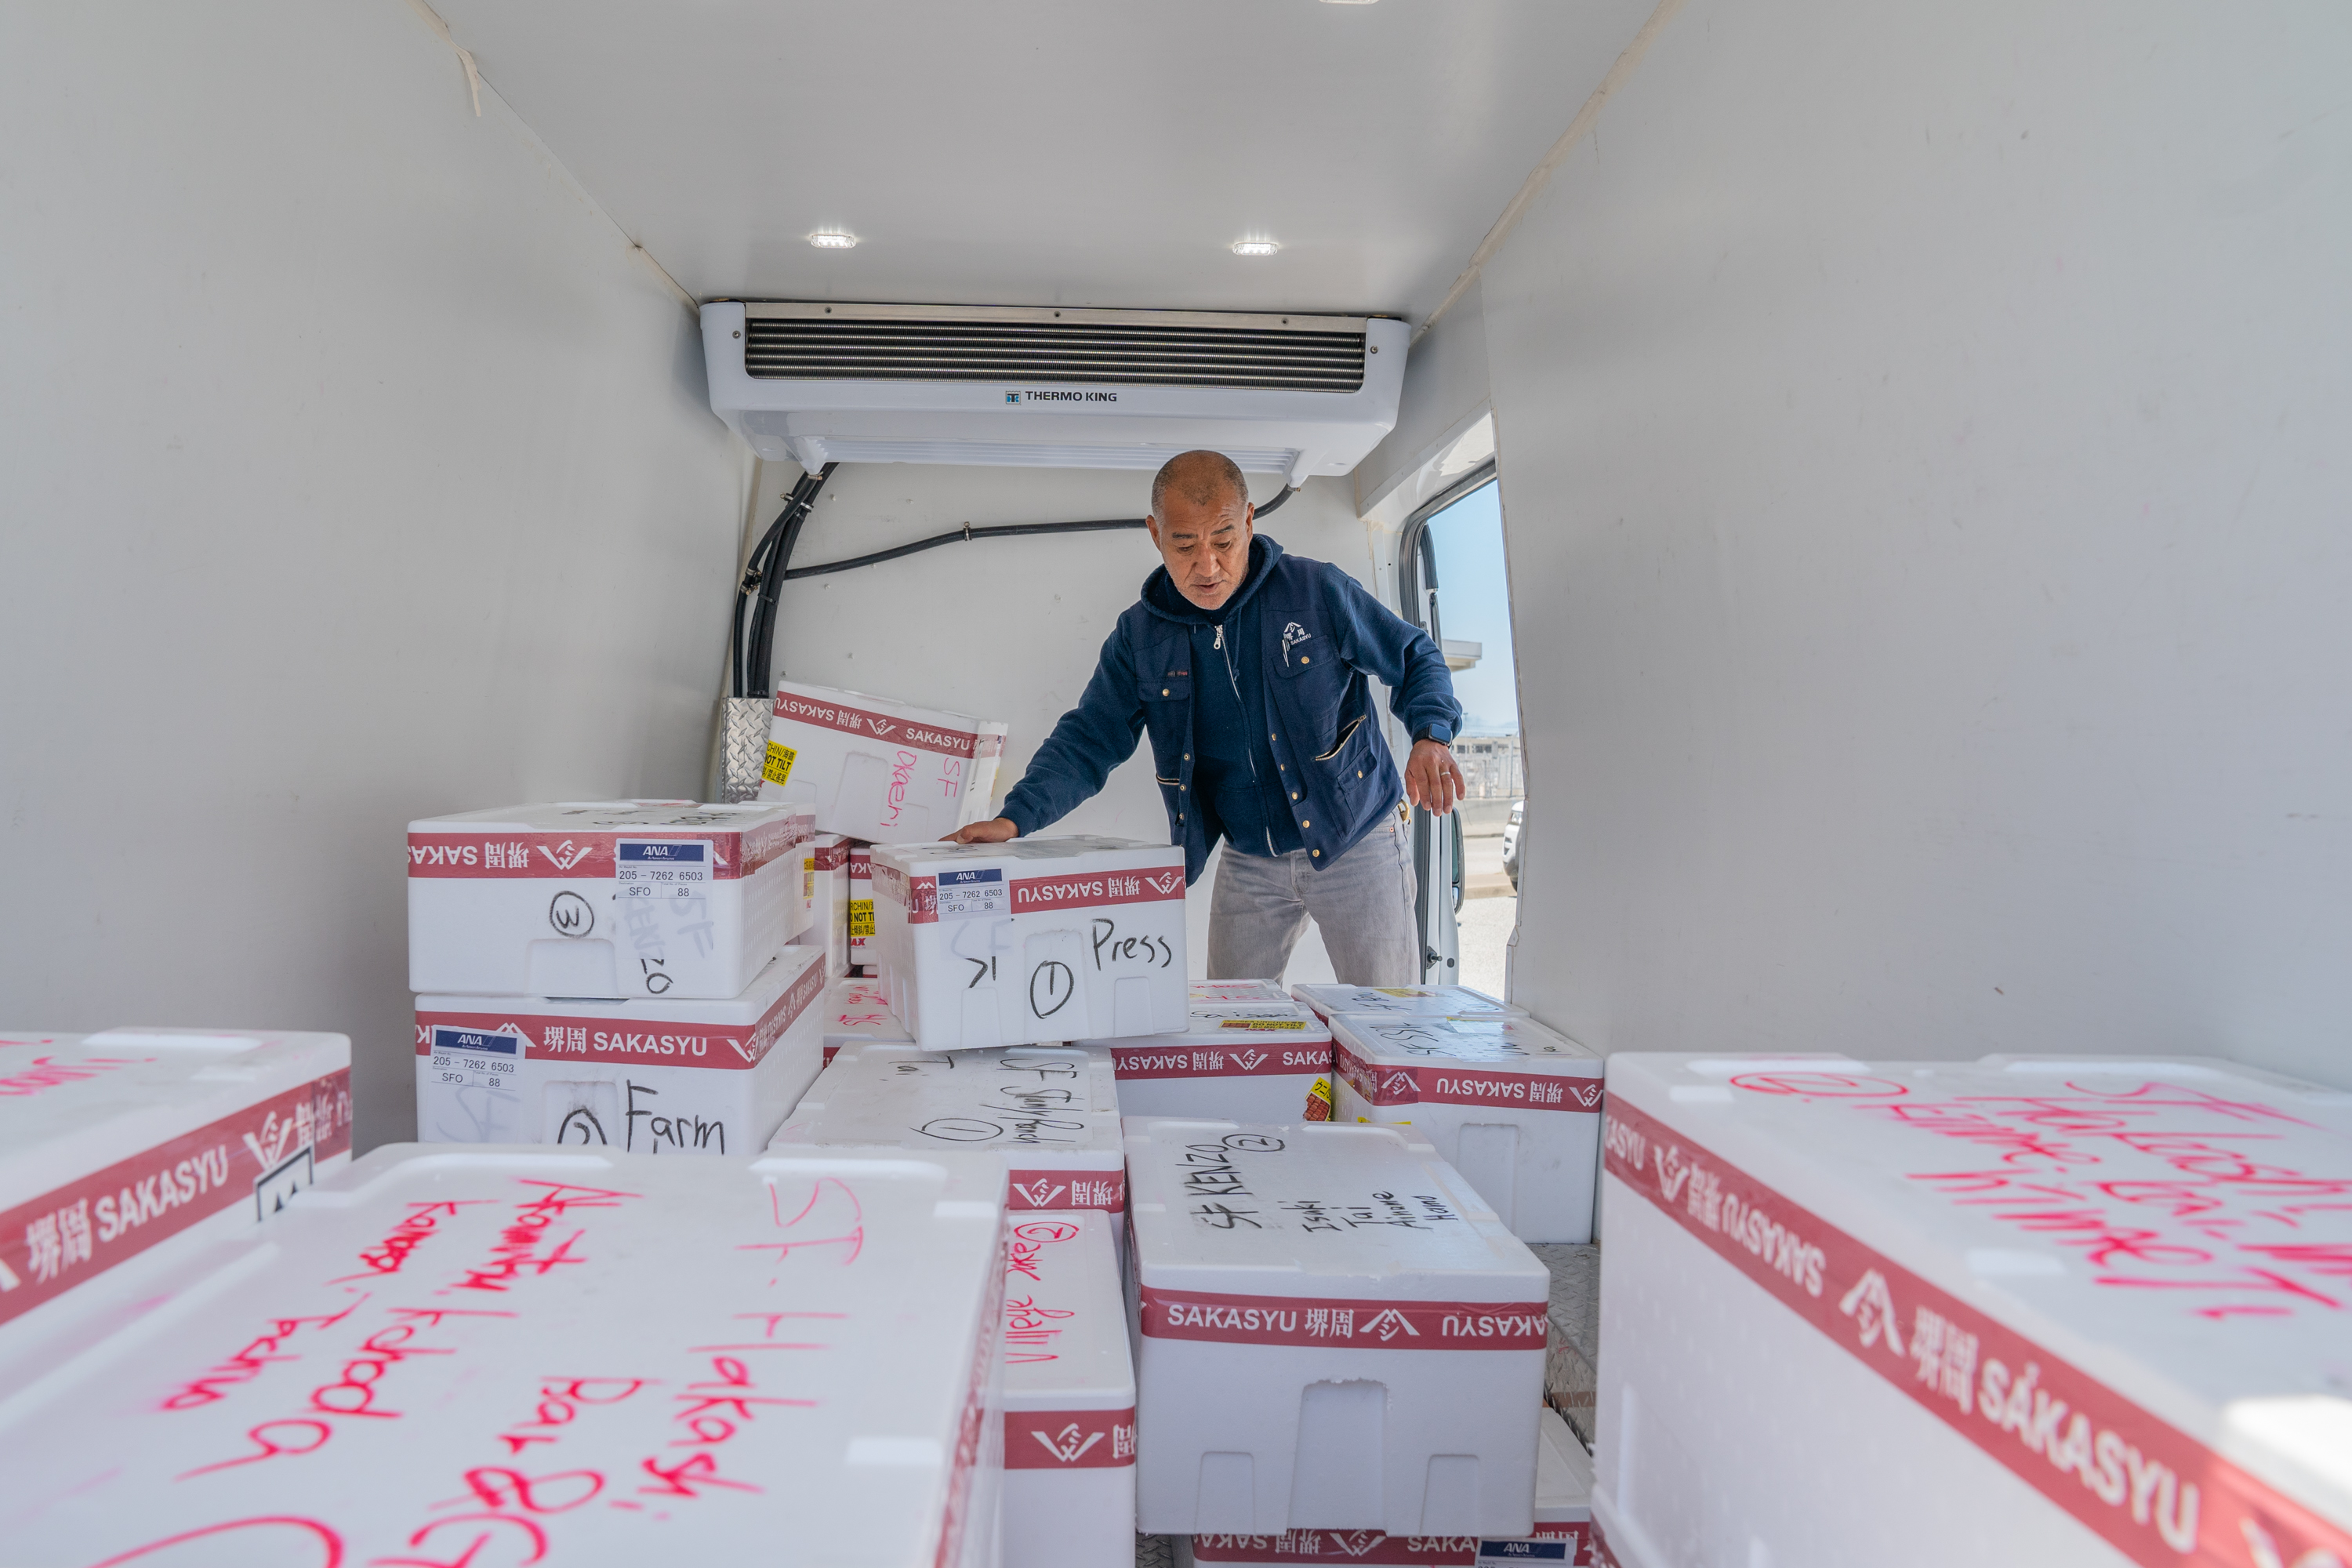 A man is inside a refrigerated truck filled with stacked white boxes labeled &quot;Sakasyu.&quot; He is organizing or inspecting the boxes.